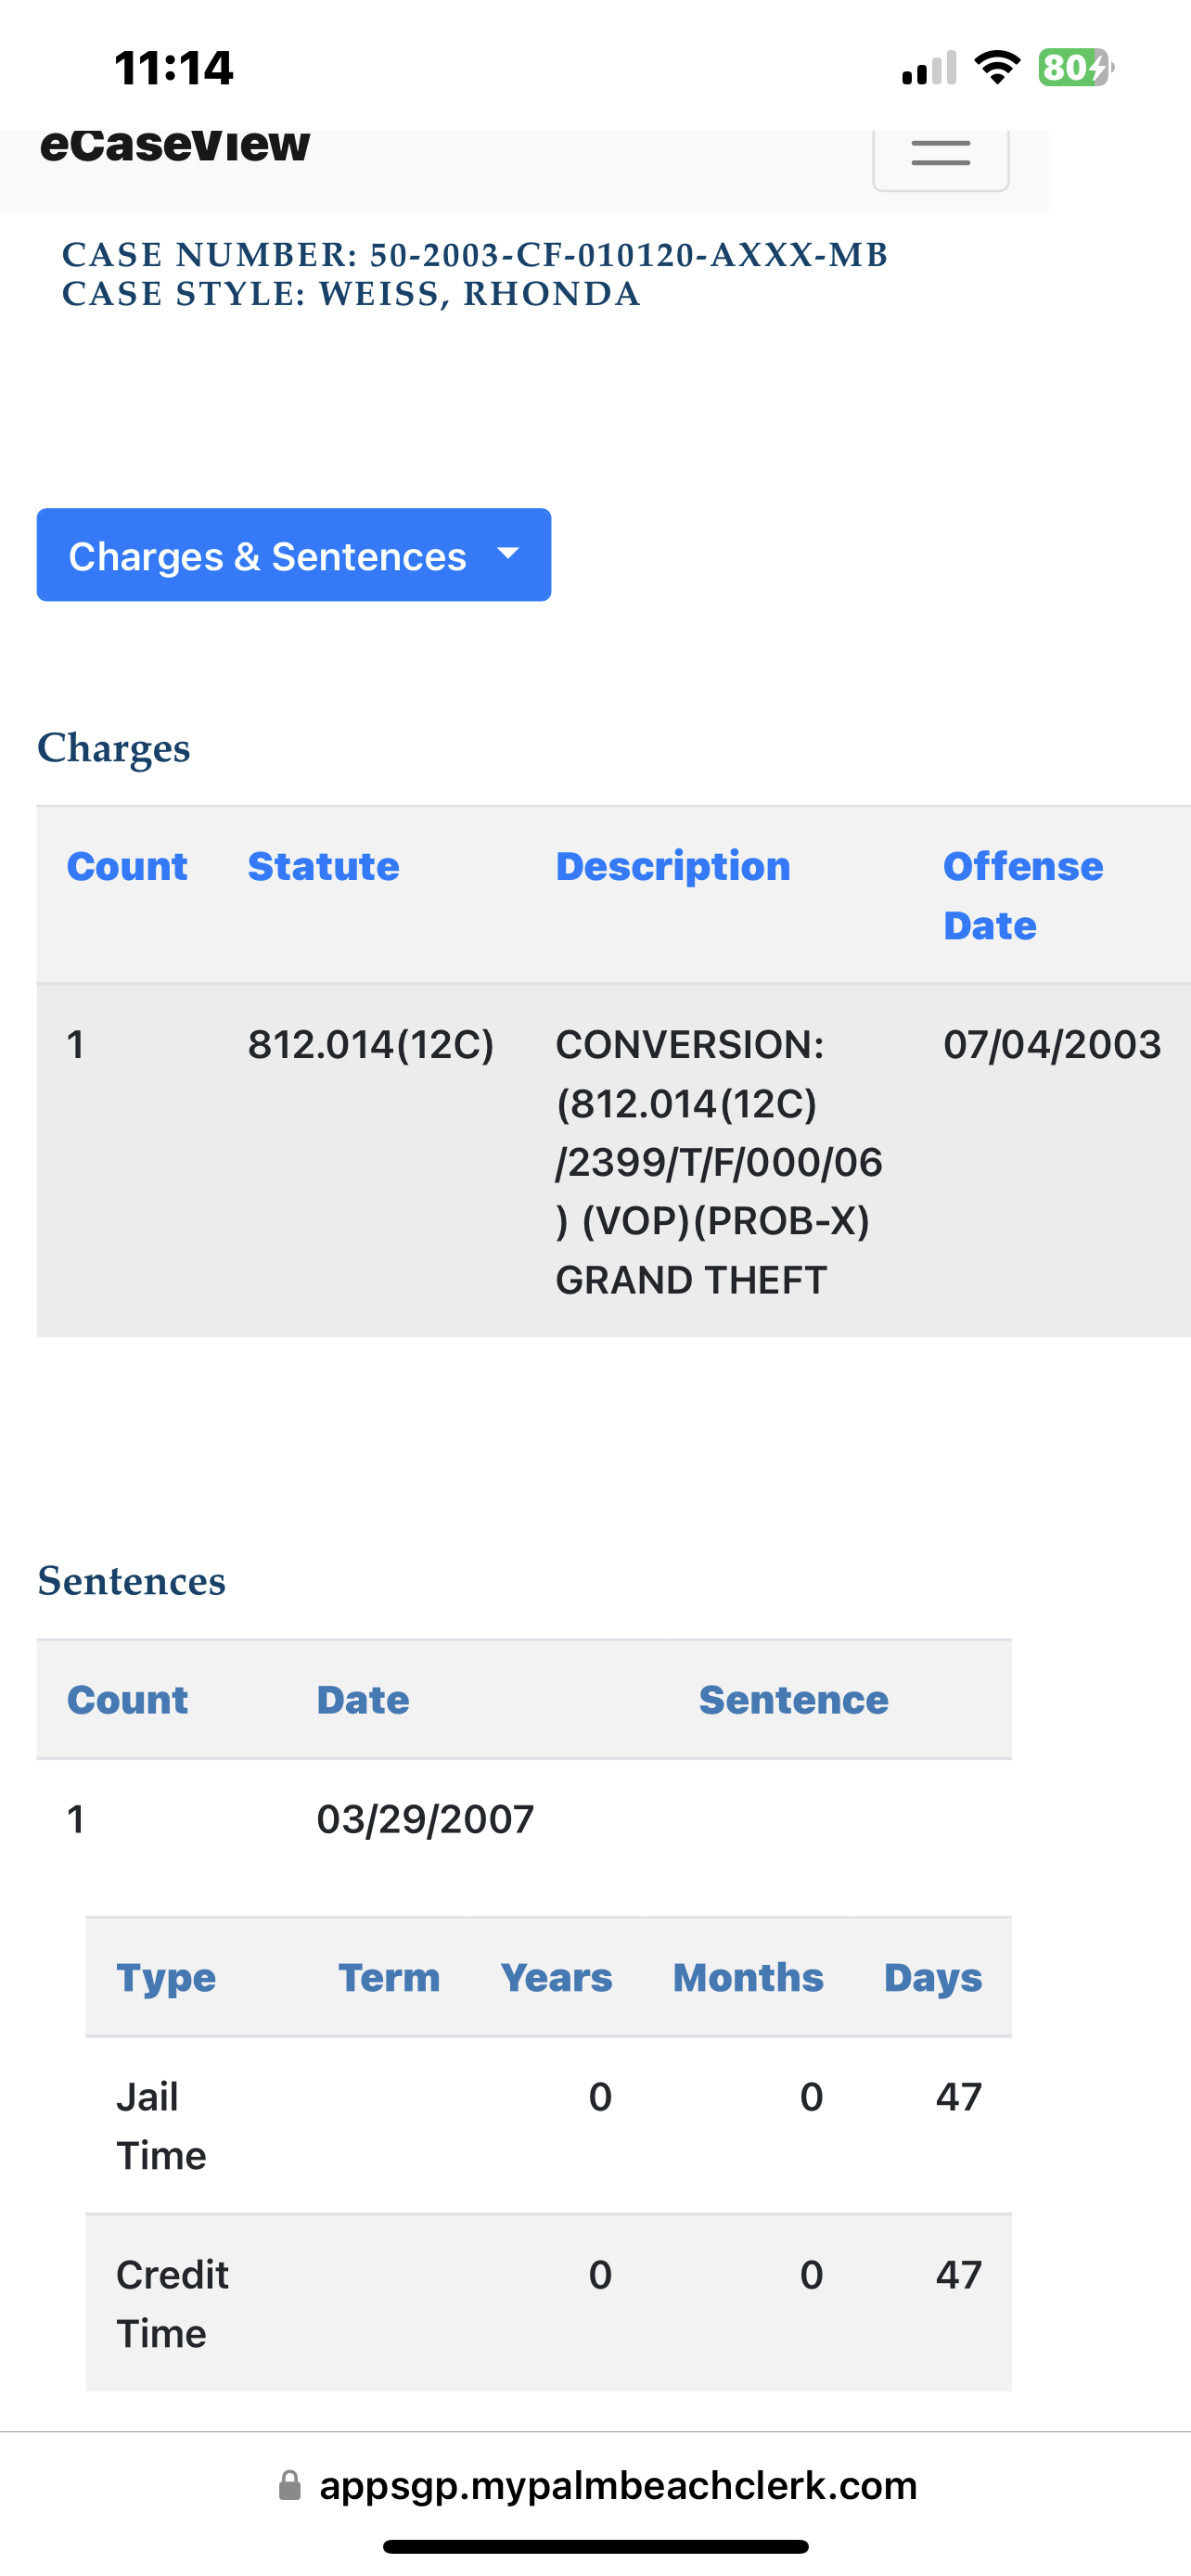 Grand theft 47 days in jail